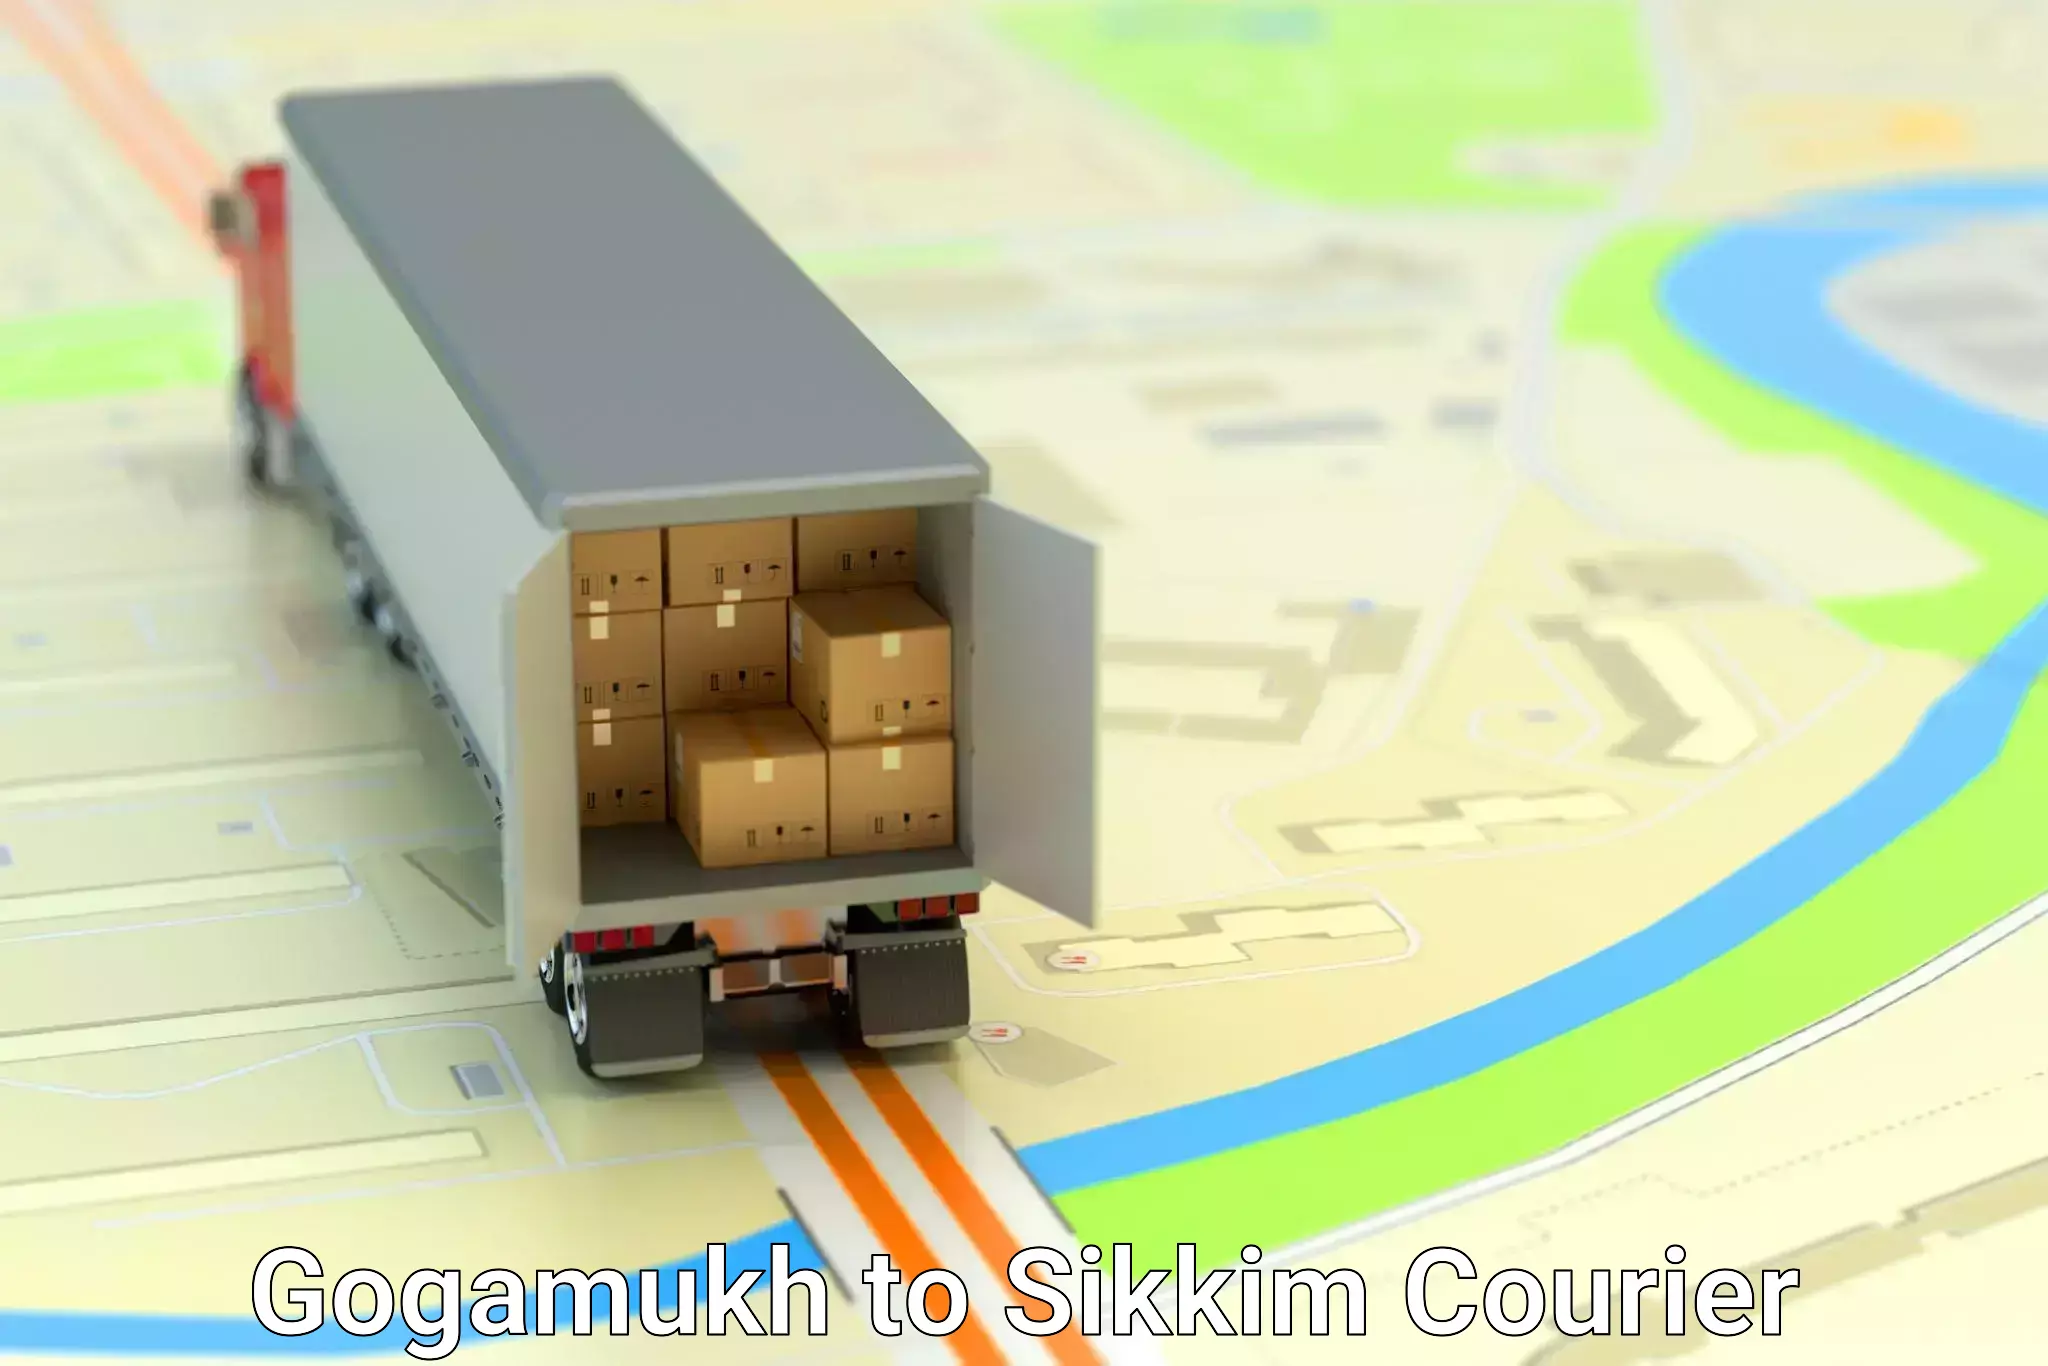 24/7 courier service Gogamukh to North Sikkim